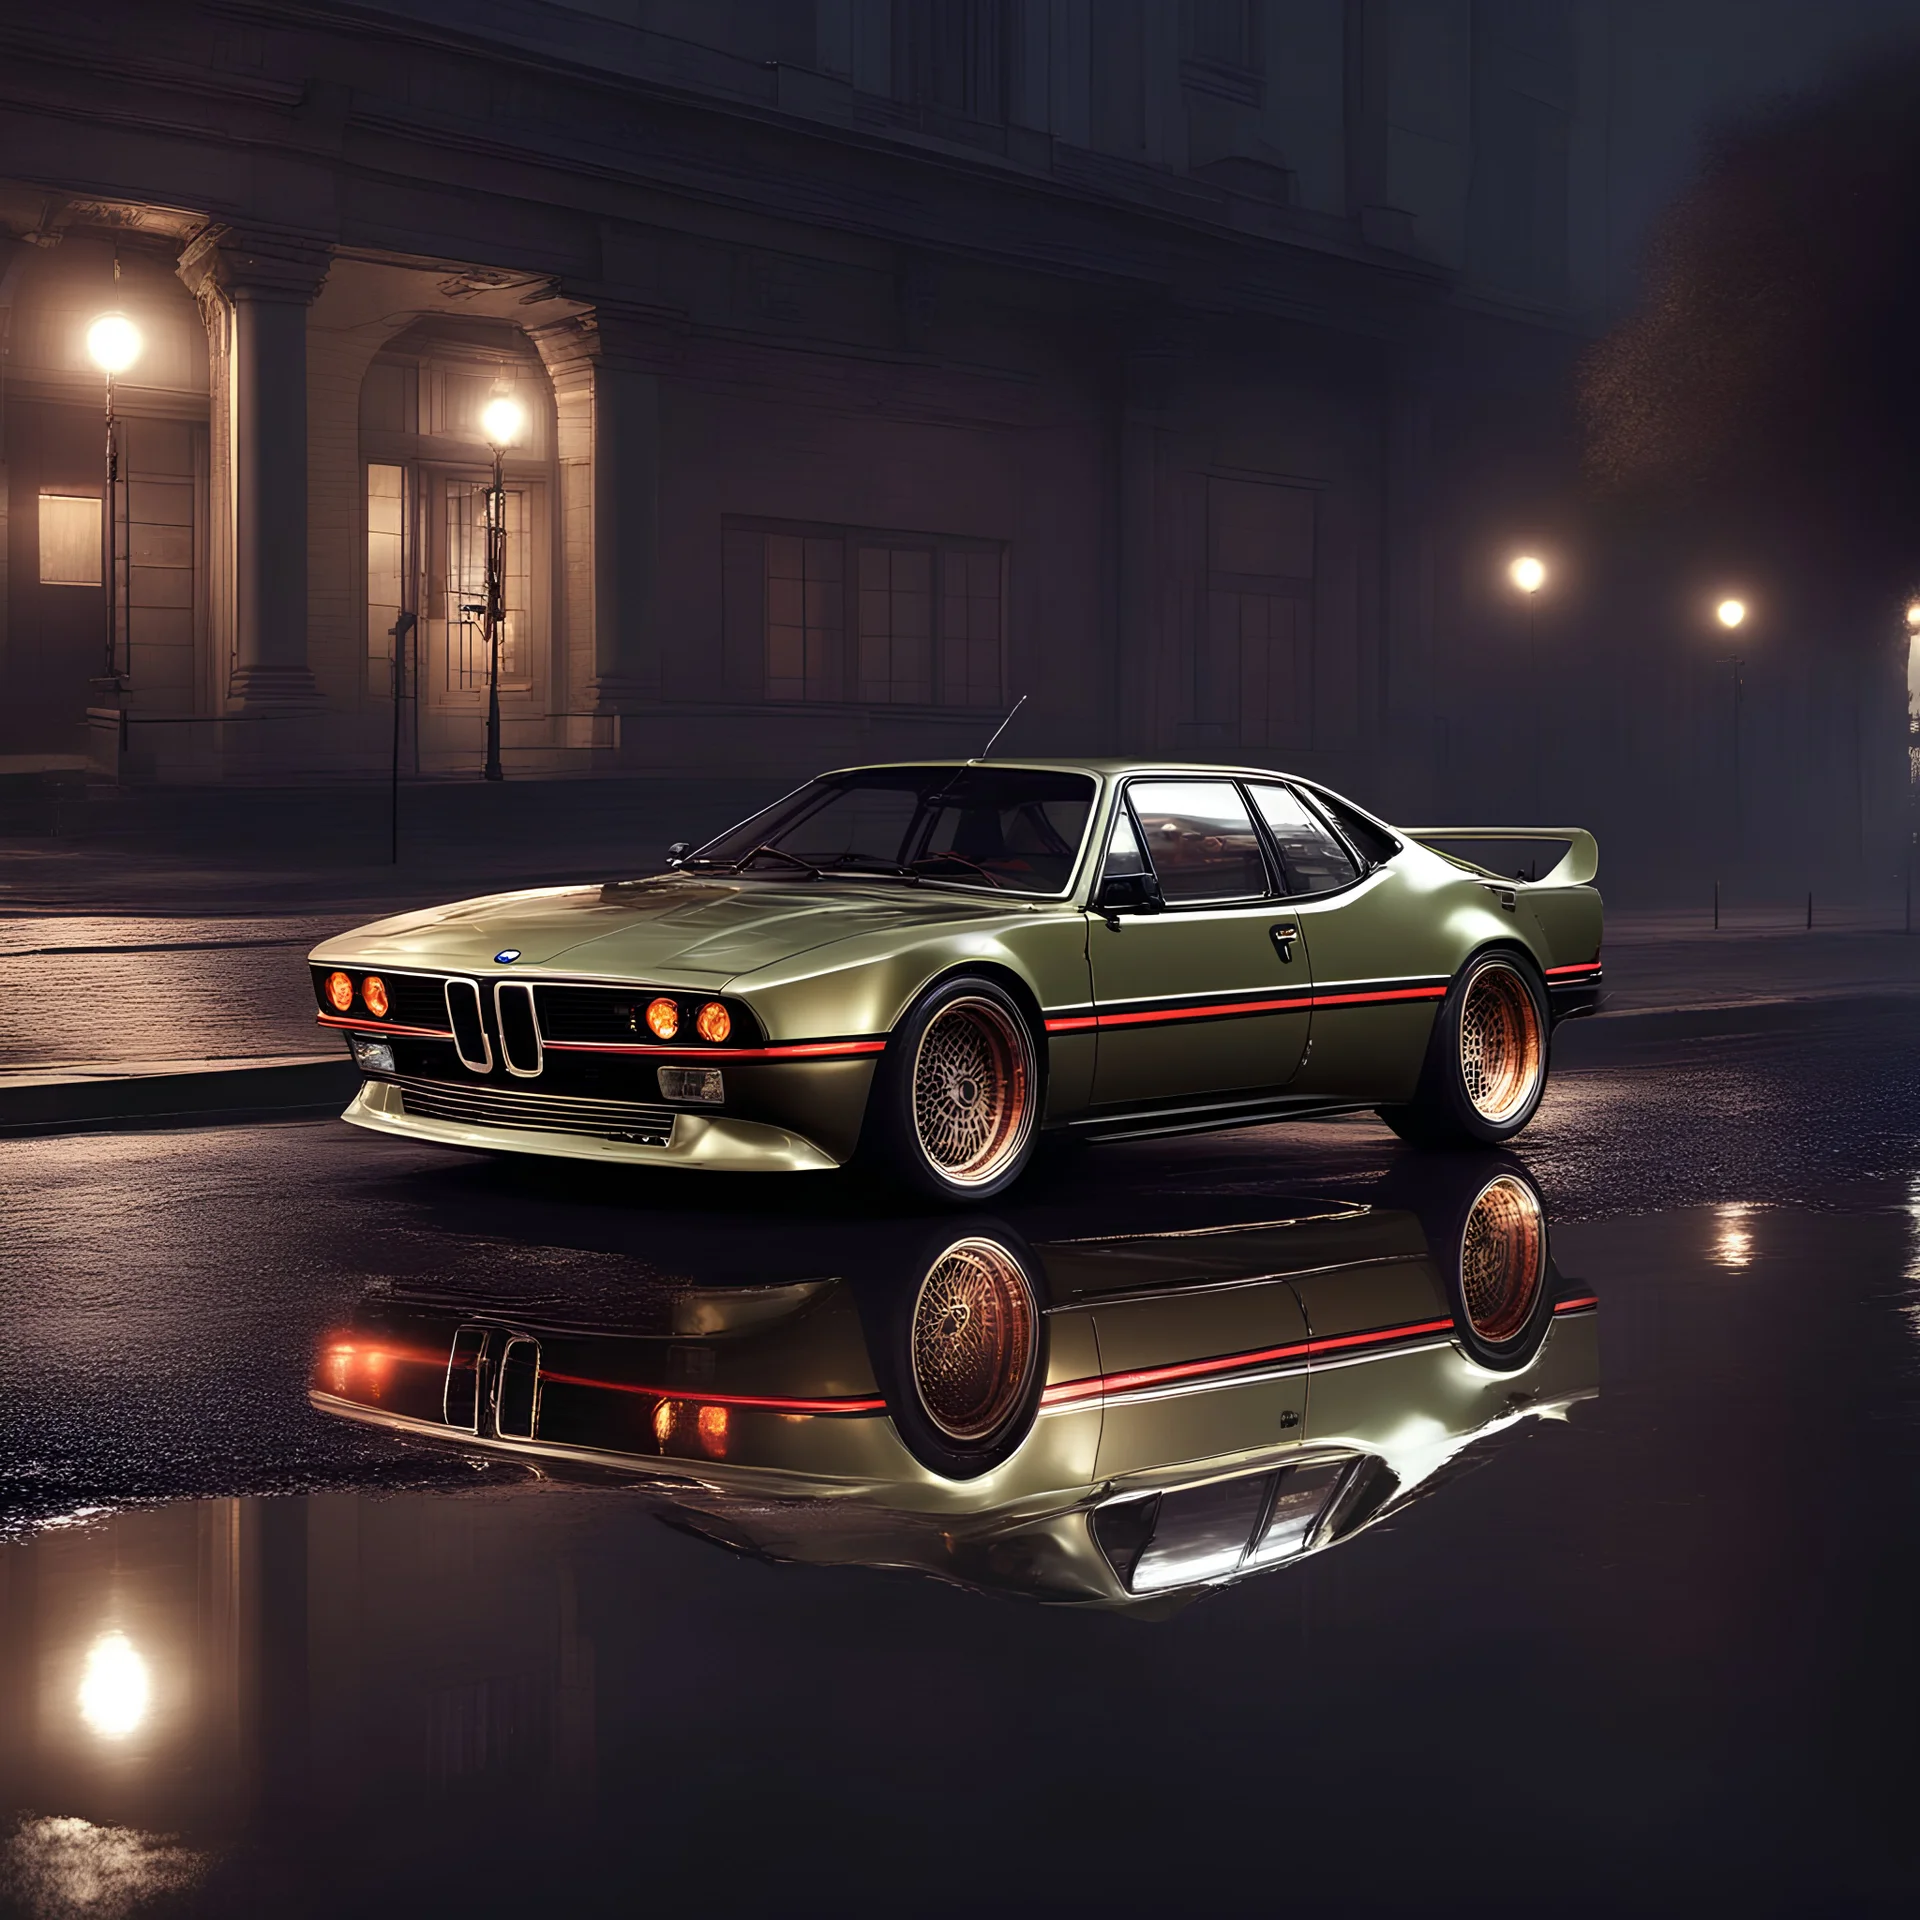 BMW M1 (1978–1981) modern retrofit, with hight speed tunning,rain,reflections,4k,raytracing,night,driving,1940s london background, volumetric lights, rtx, Canon 5d, photorealism, candy, stance works,widebody, hyperreal, selective bloom, dof, thin lines, 8k textures, neon lights from cyberpunk